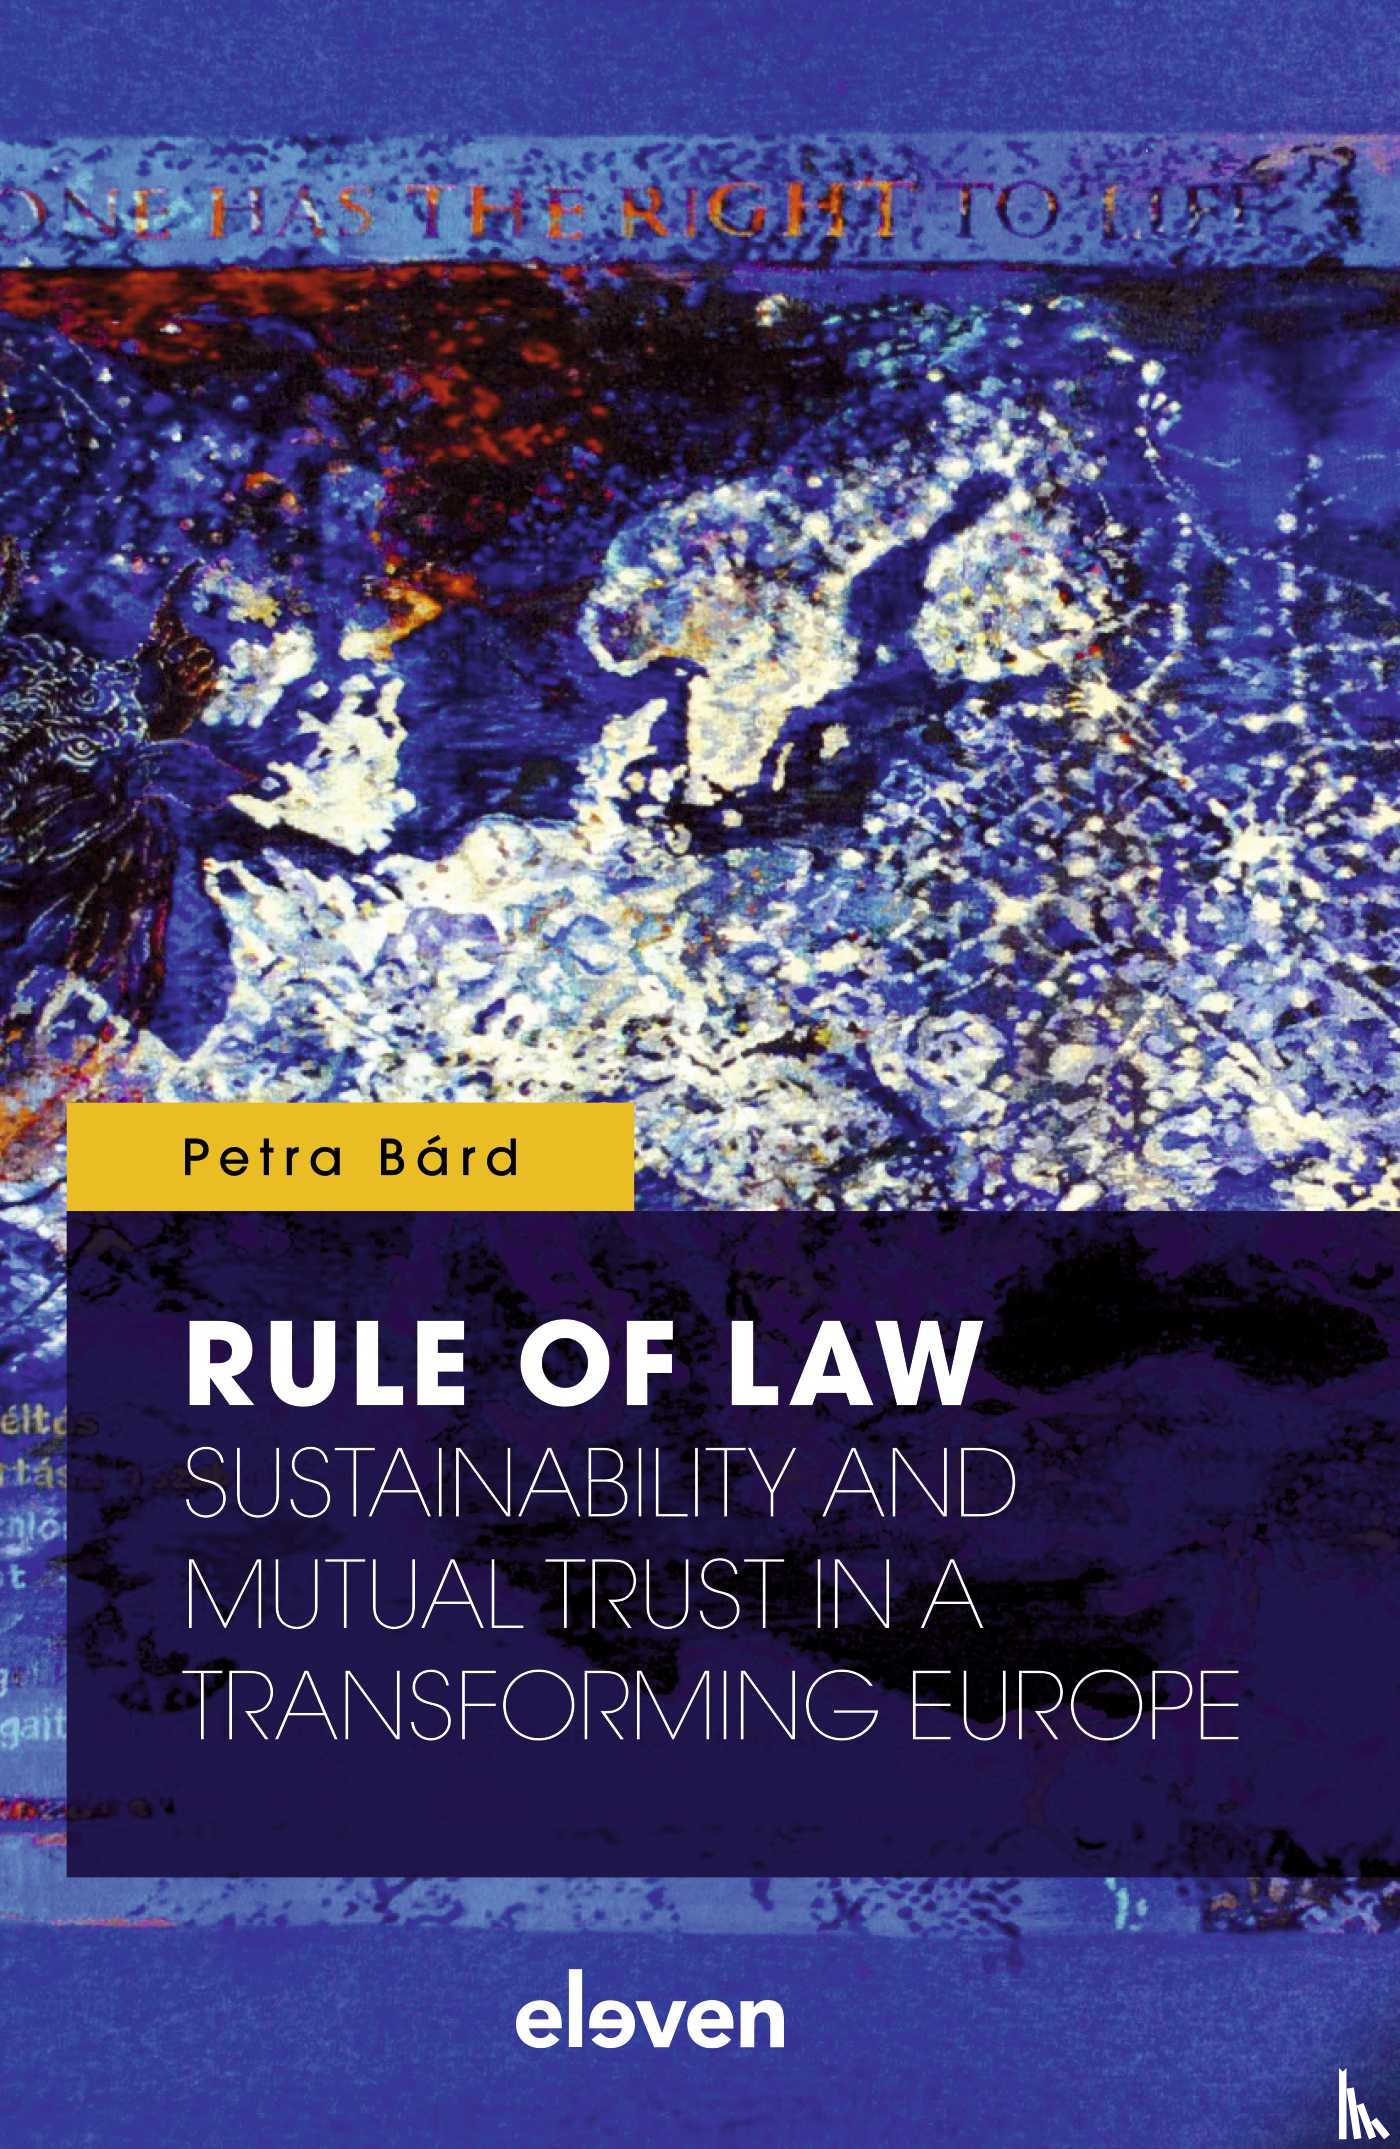 Bárd, Petra - Rule of Law: Sustainability and Mutual Trust in a Transforming Europe